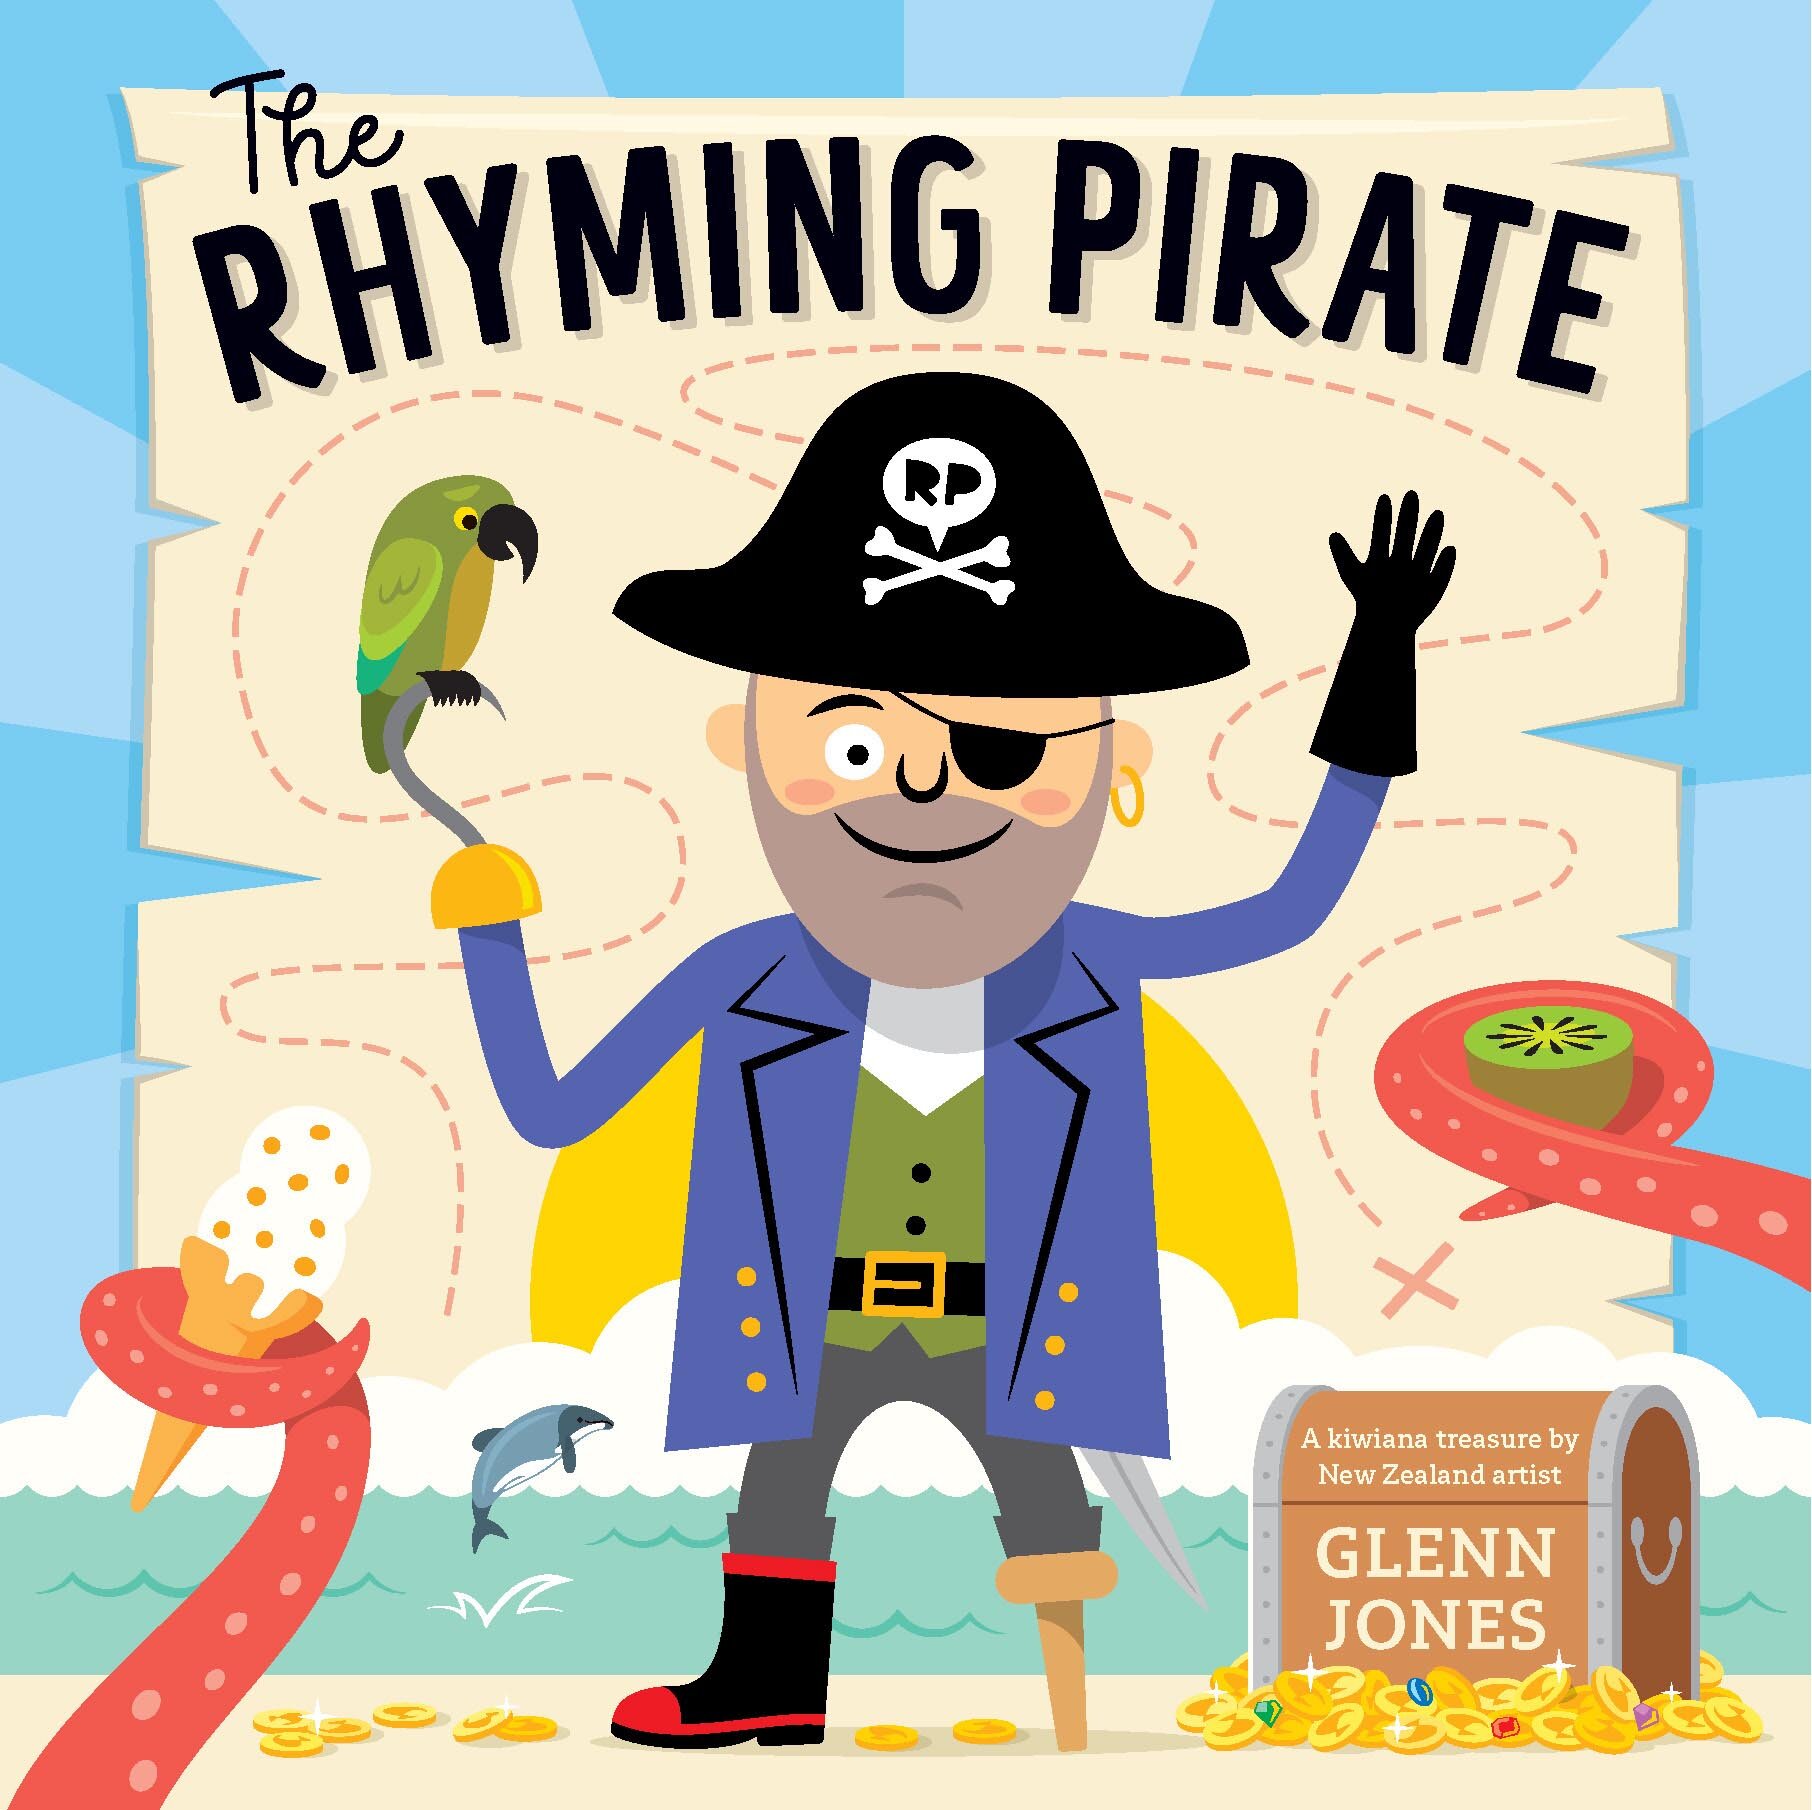  Published by Little Love. Publication date: November 10th 2021  ARGH! I’M THE RHYMING PIRATE!  Have a LOOK inside this BOOK  then read it at your LEISURE,  because hidden in the pages  you’ll find loads of Kiwi TREASURE!   Join the pirate and his  c